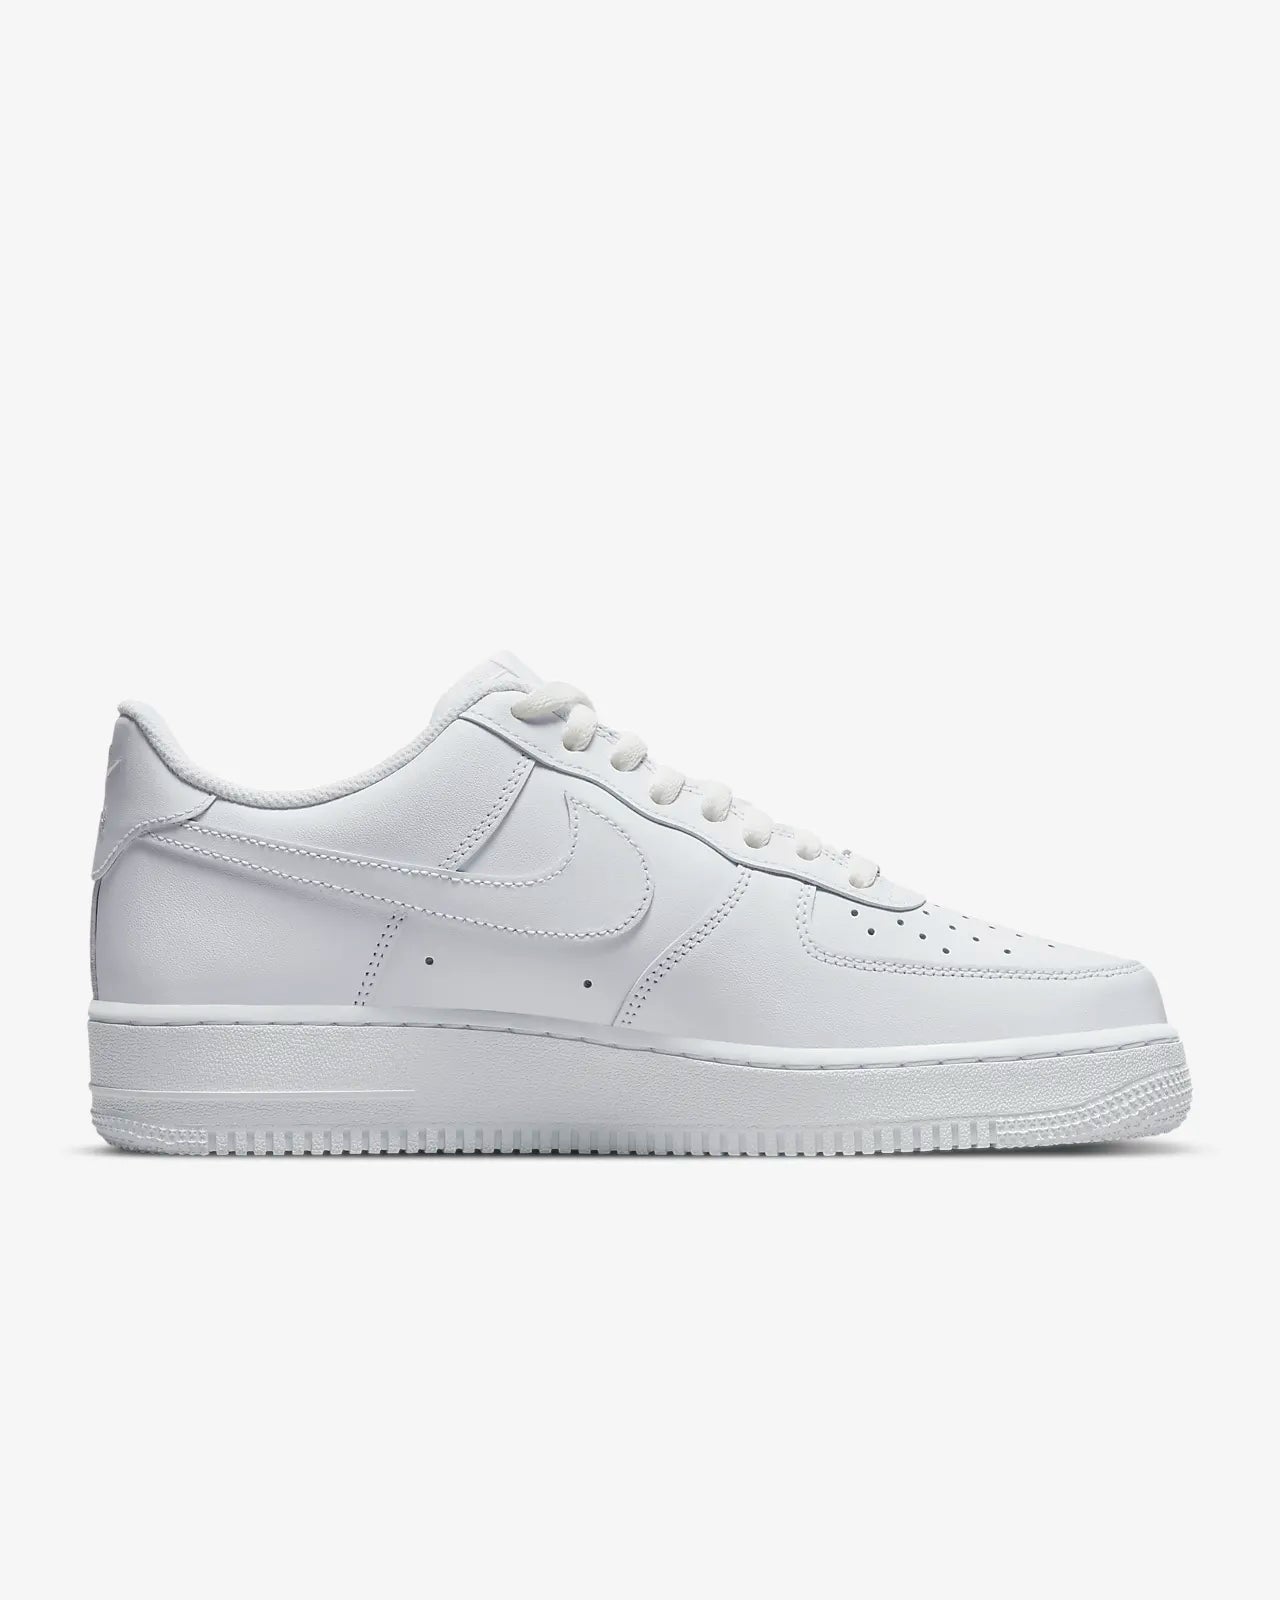 Nike Air Force 1 Low “White”